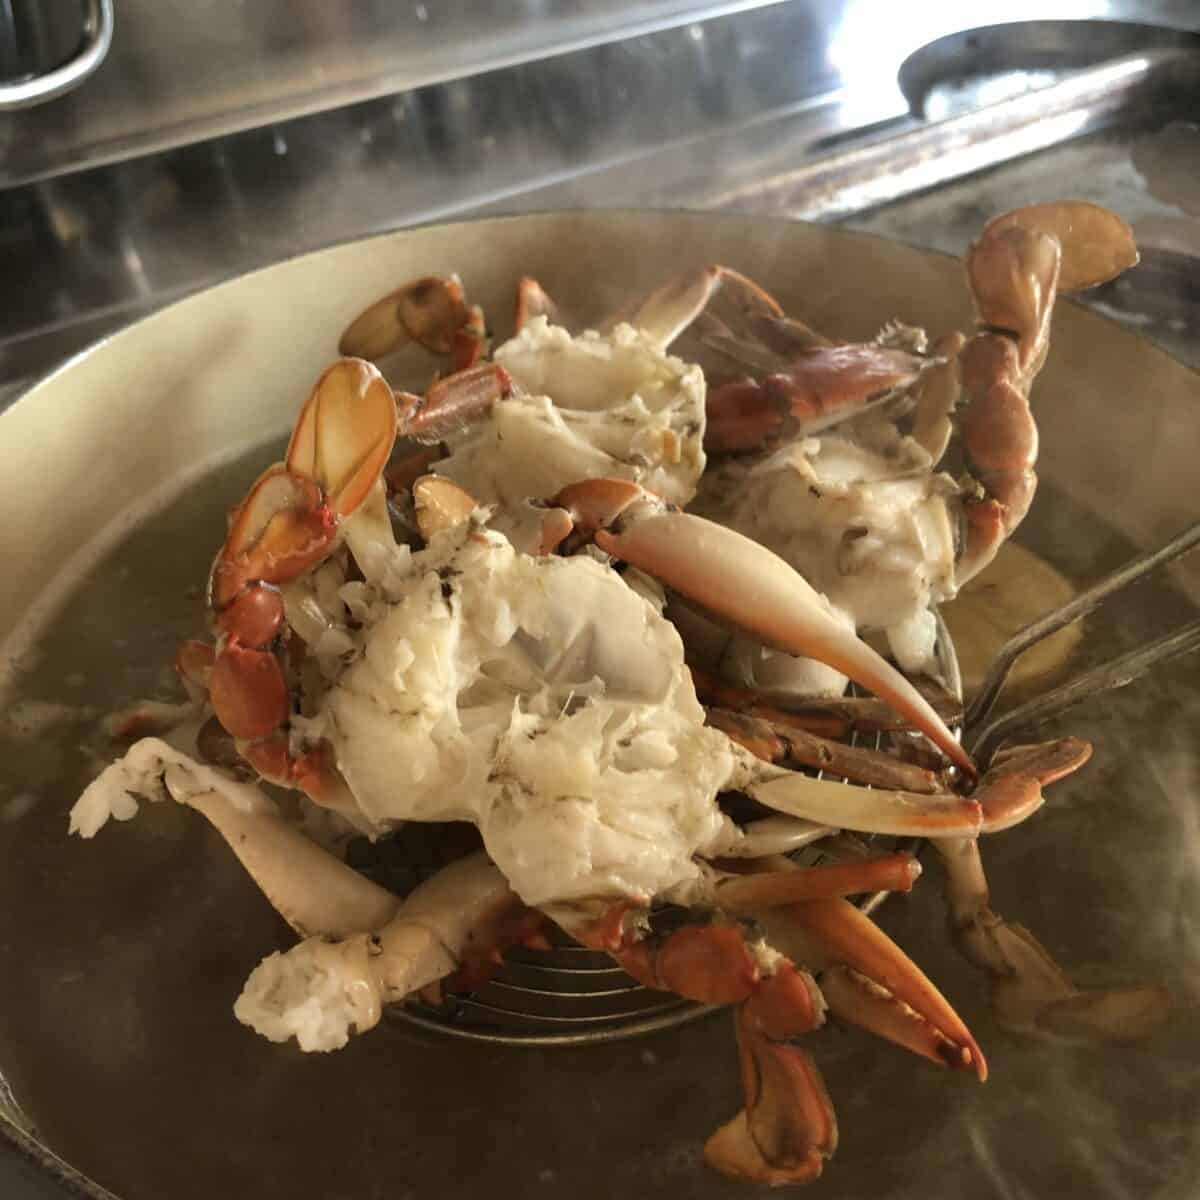 Removing the cooked blue crabs from the crab boil water.